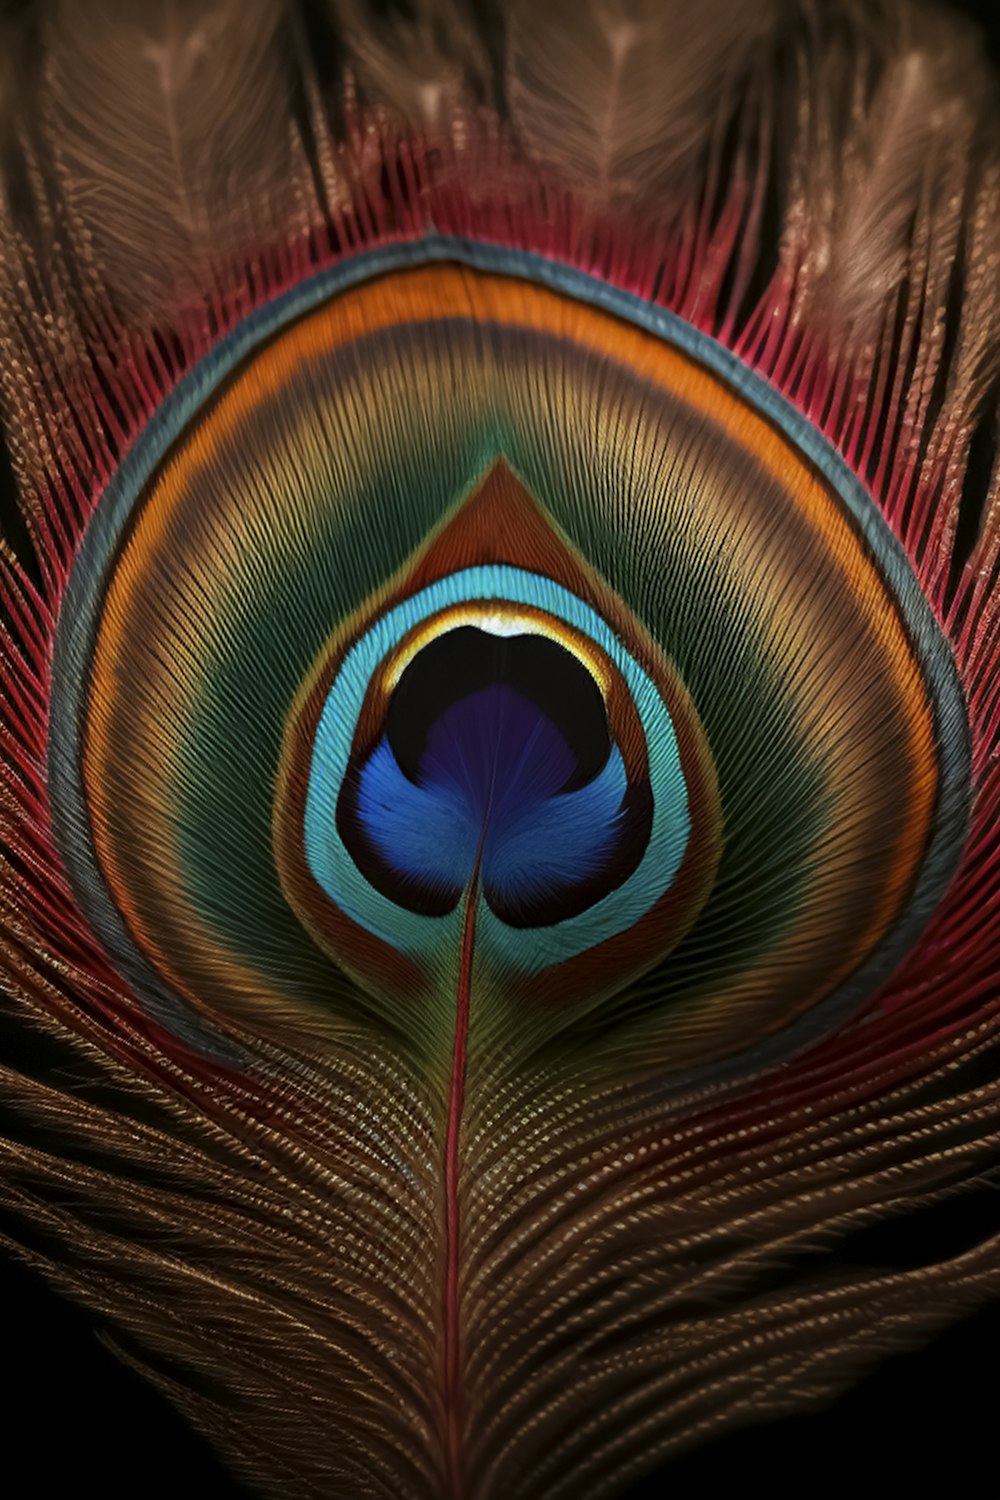 a close up of a peacock's feathers tail